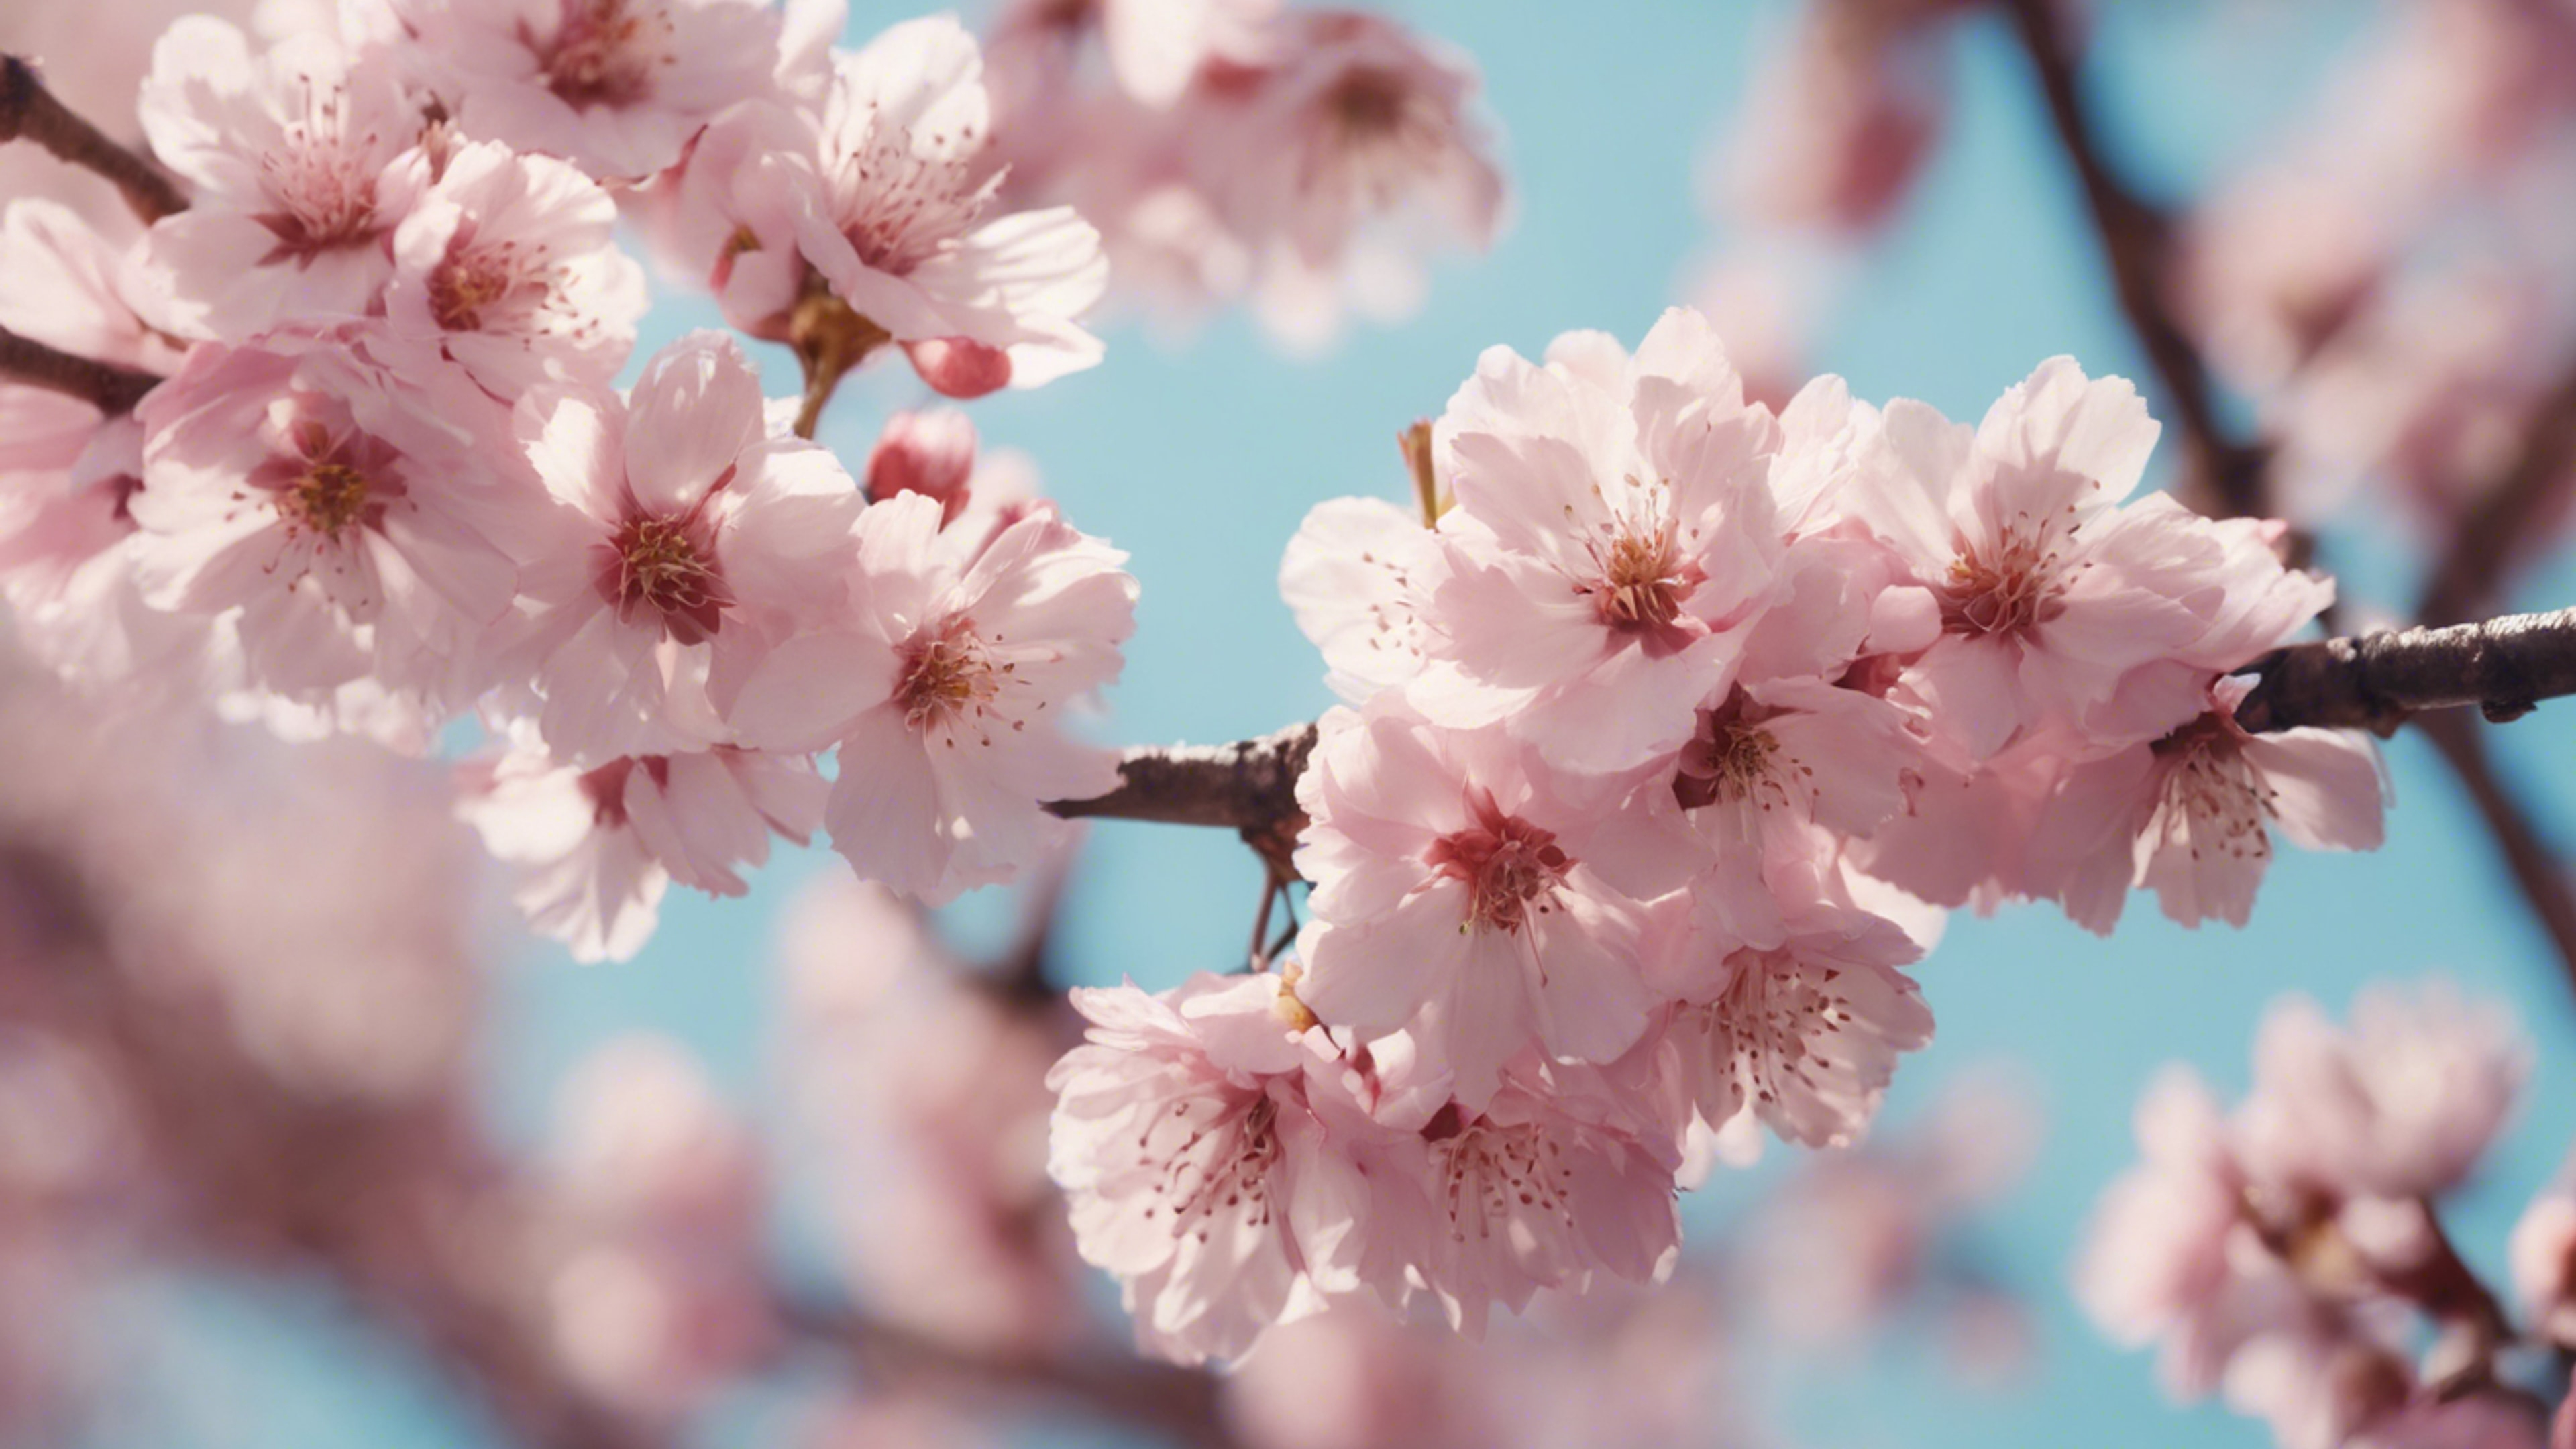 A vibrant scene of pastel pink cherry blossoms falling gently. Обои[c8bce7433f184c22a8f5]